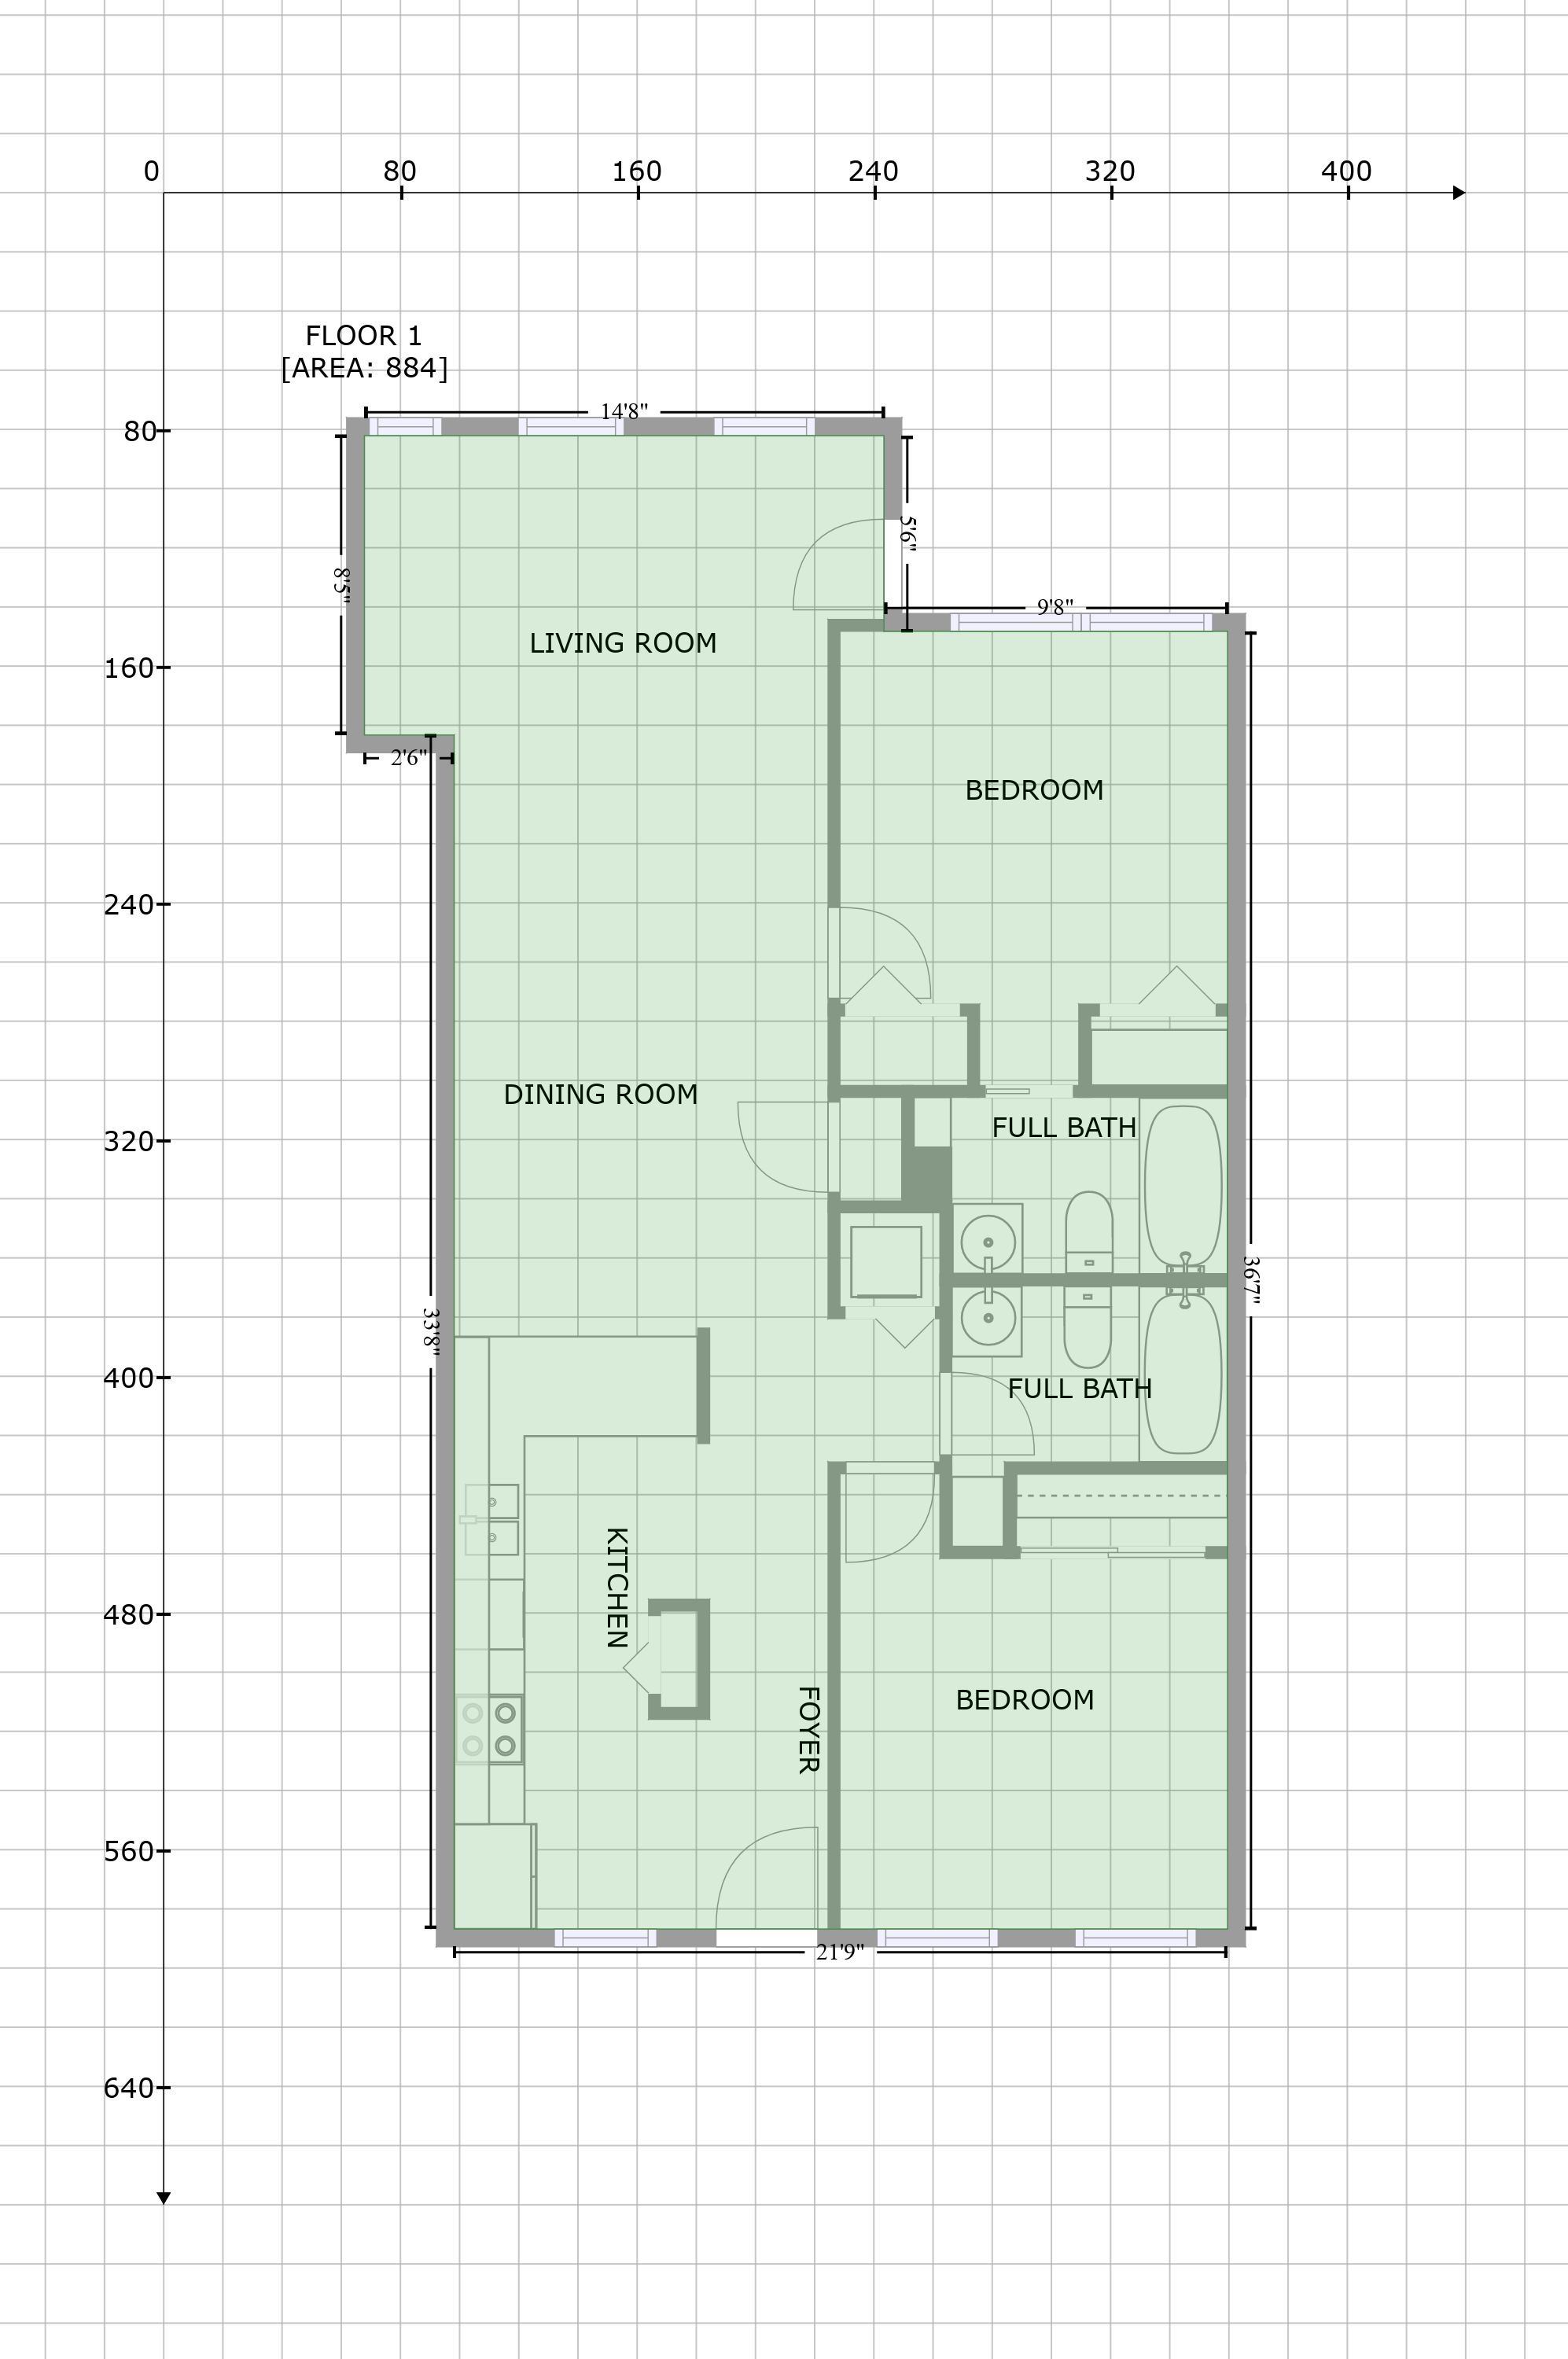 Gross Livable Floor Plan Example for Real Estate